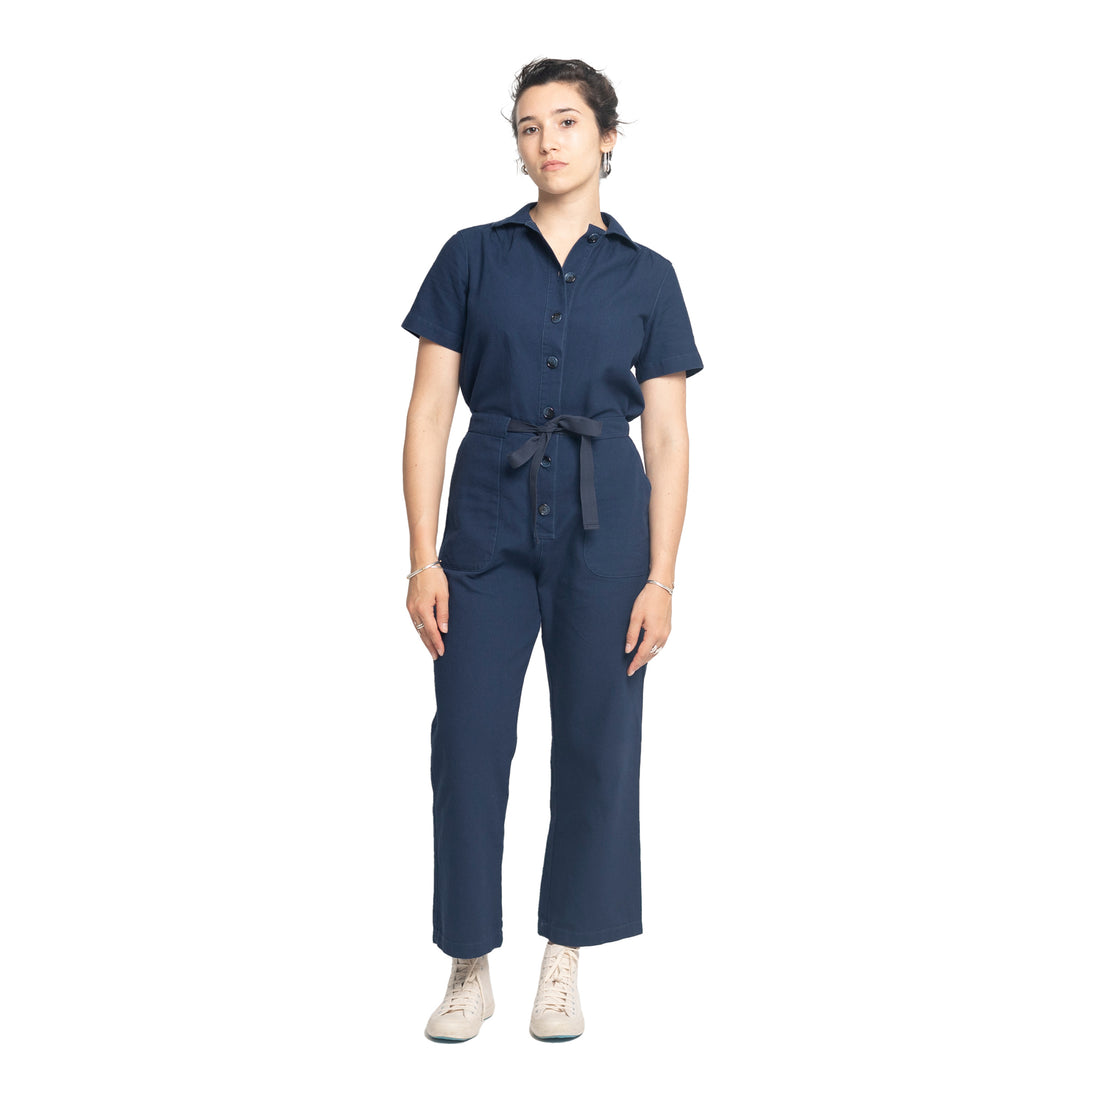 Coveralls & Utility Jumpsuits: Long & Short Sleeve | WILDFANG - Wildfang